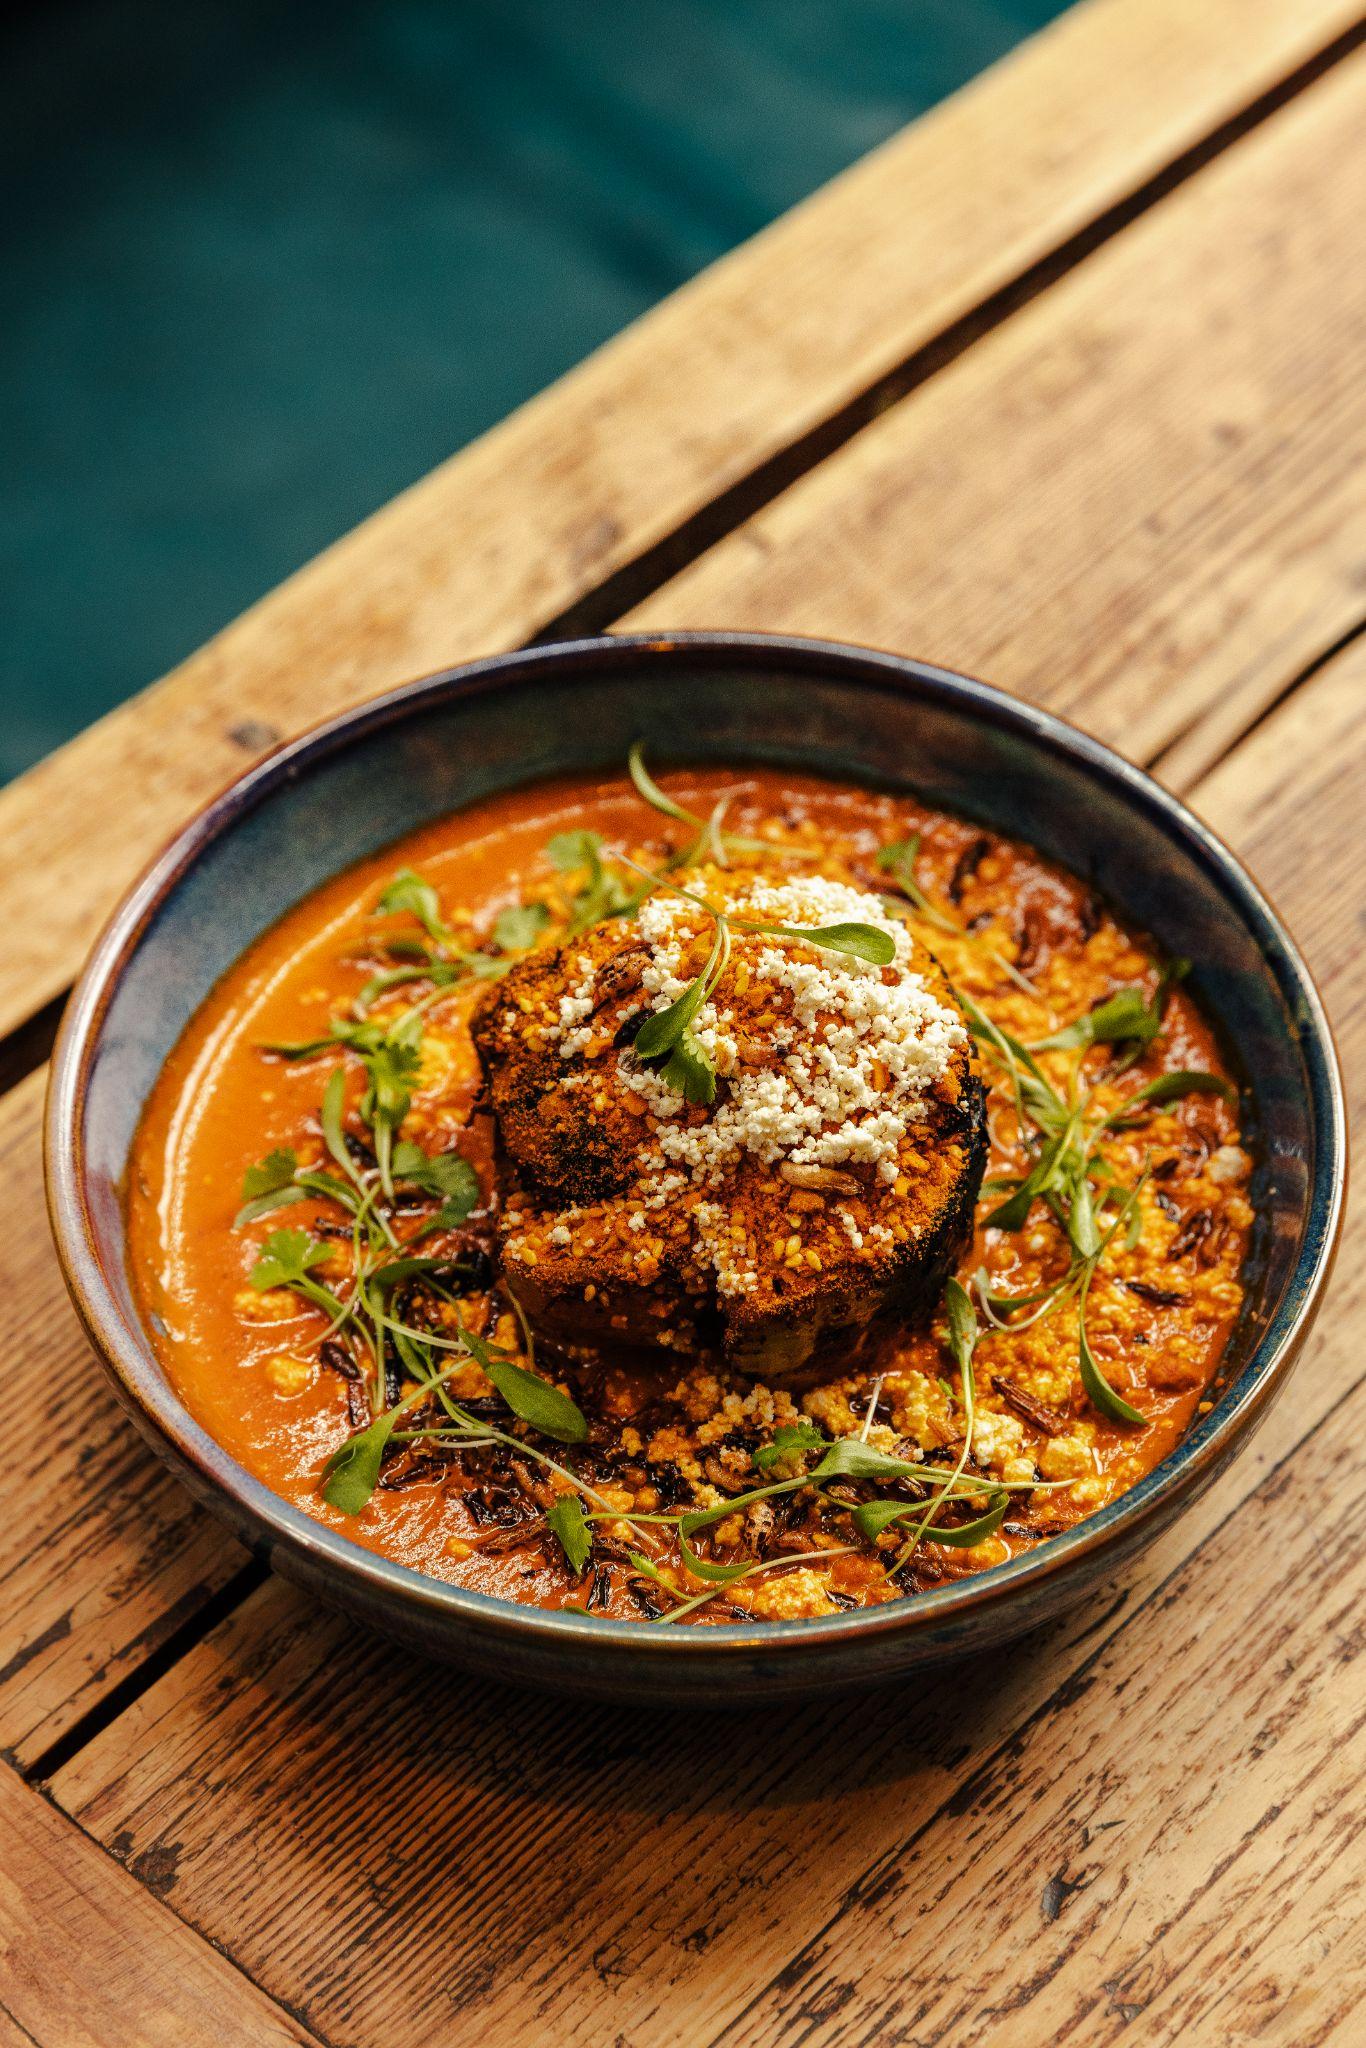 Chef Will Bowlby Redefines Indian Flavours with Authenticity and Innovation at Magazine St. Kitchen-Image 2